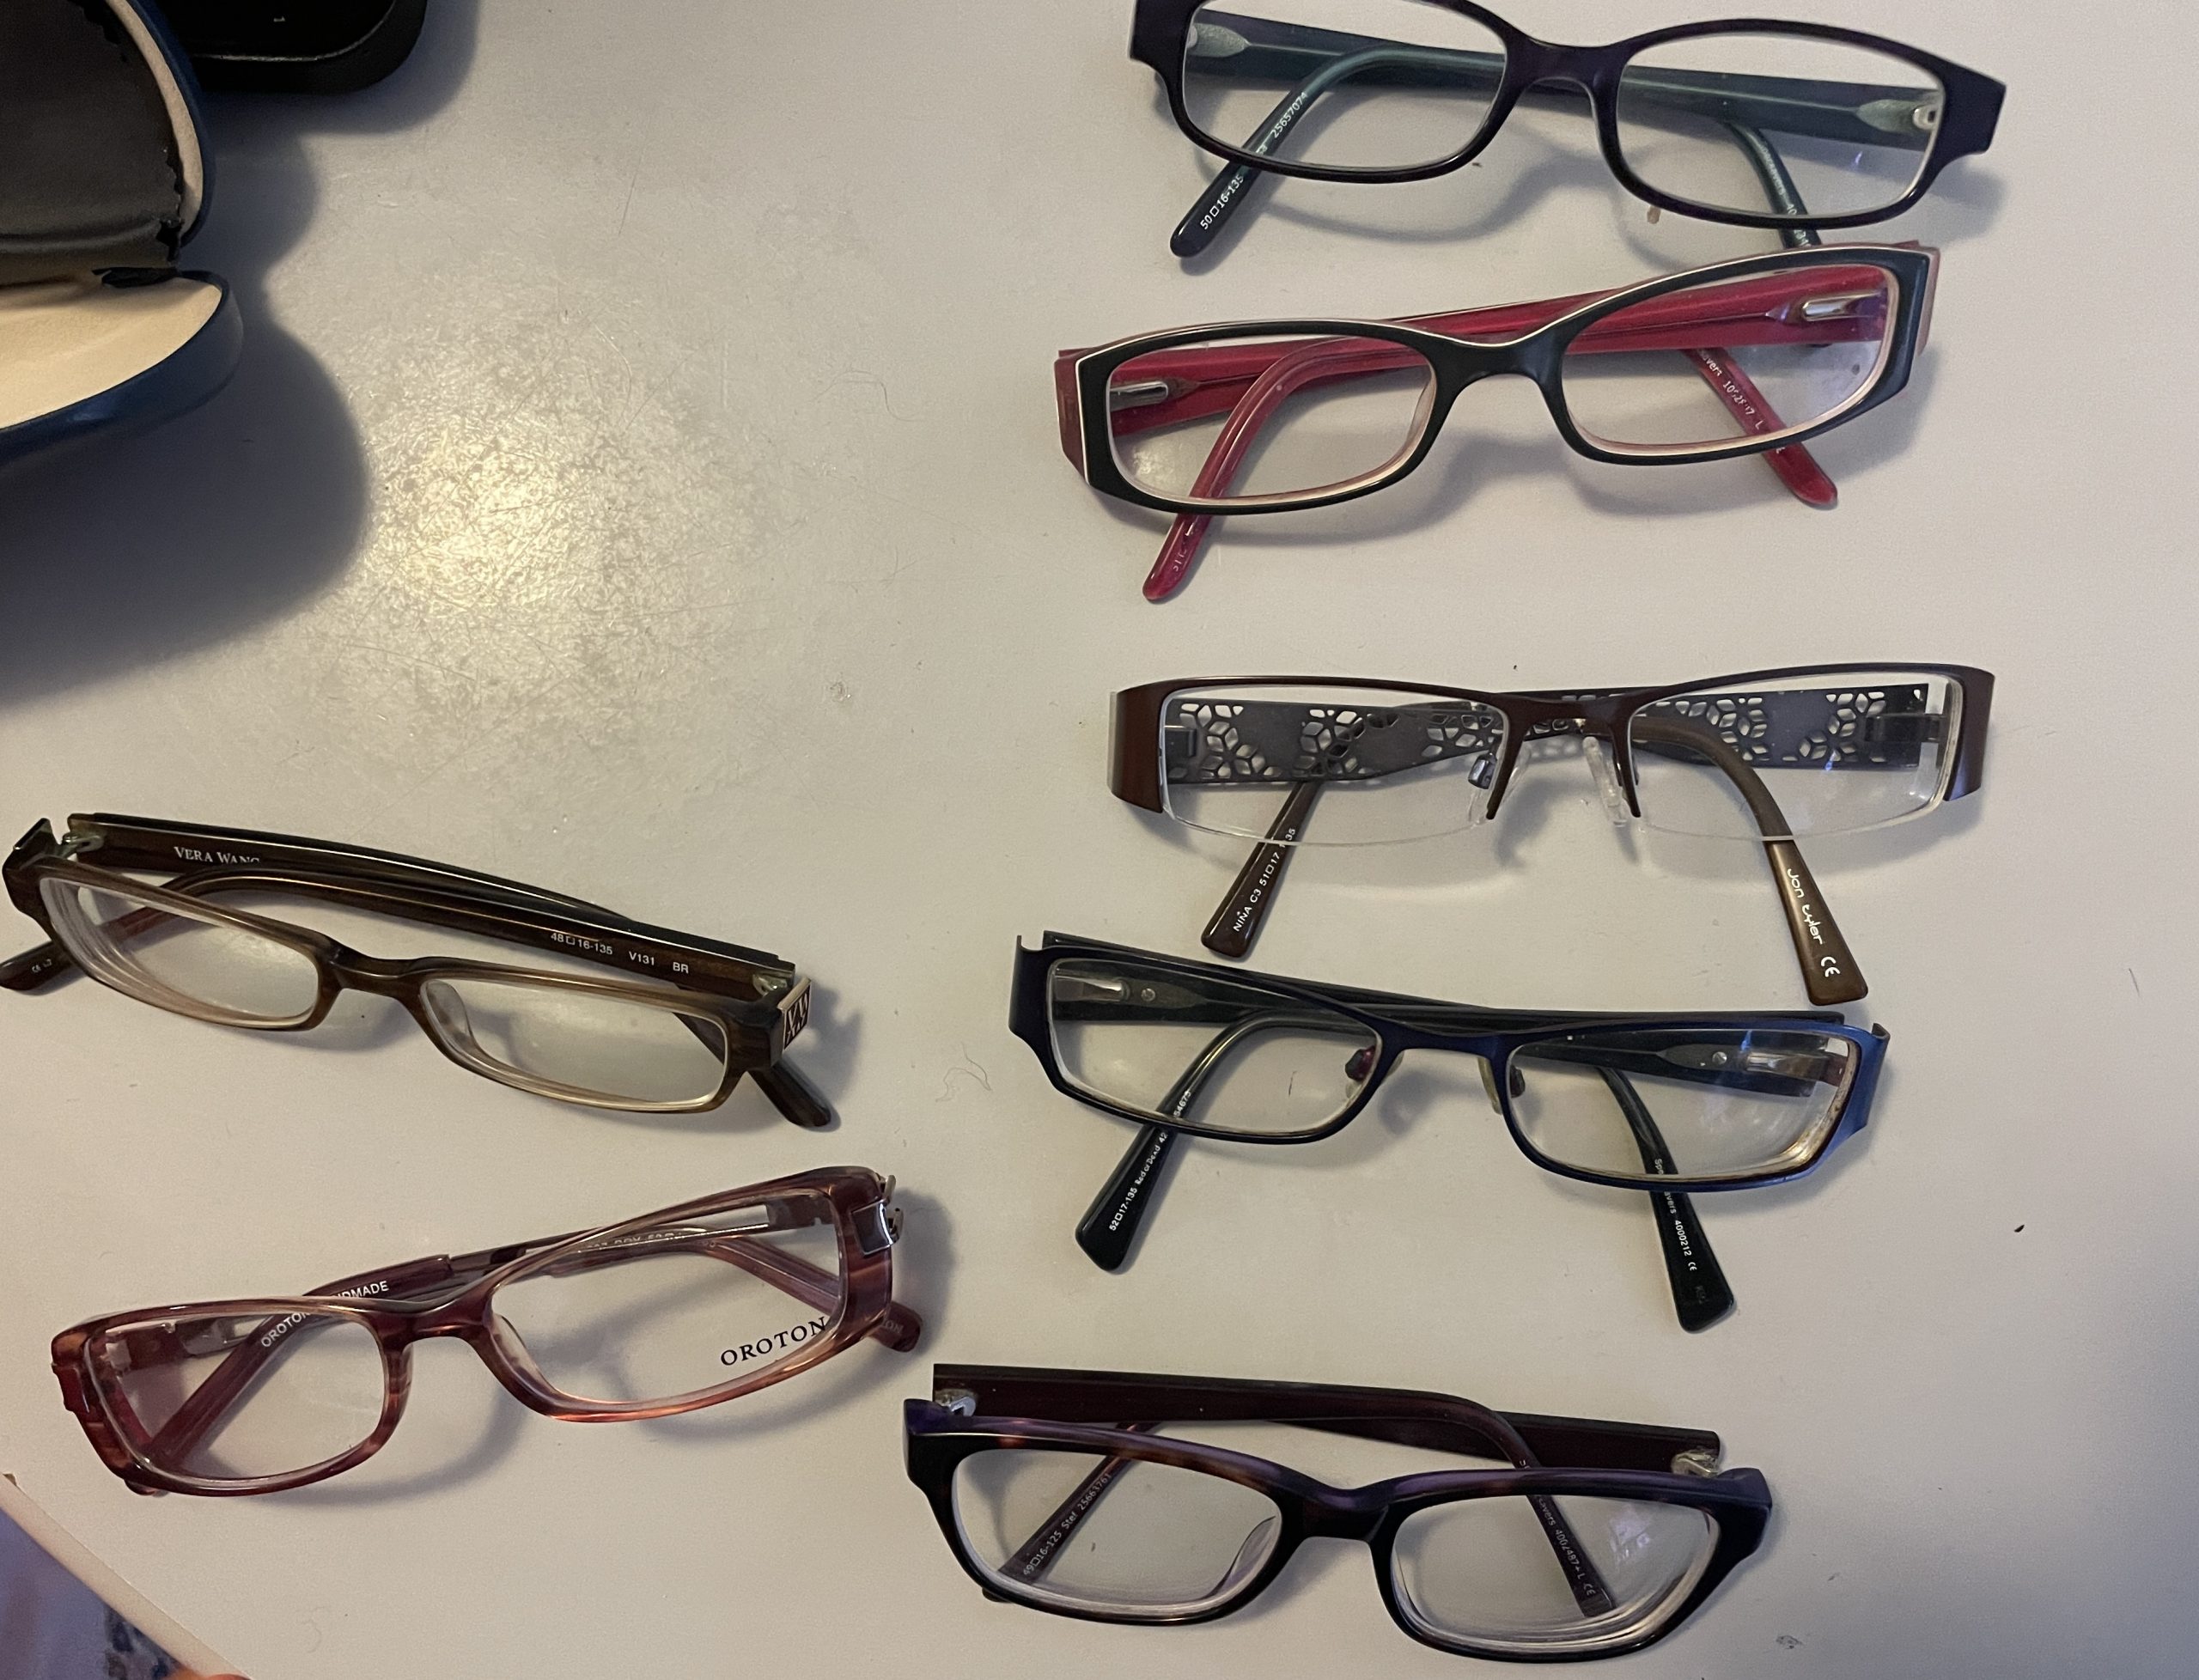 Recycle your old glasses at Specsavers